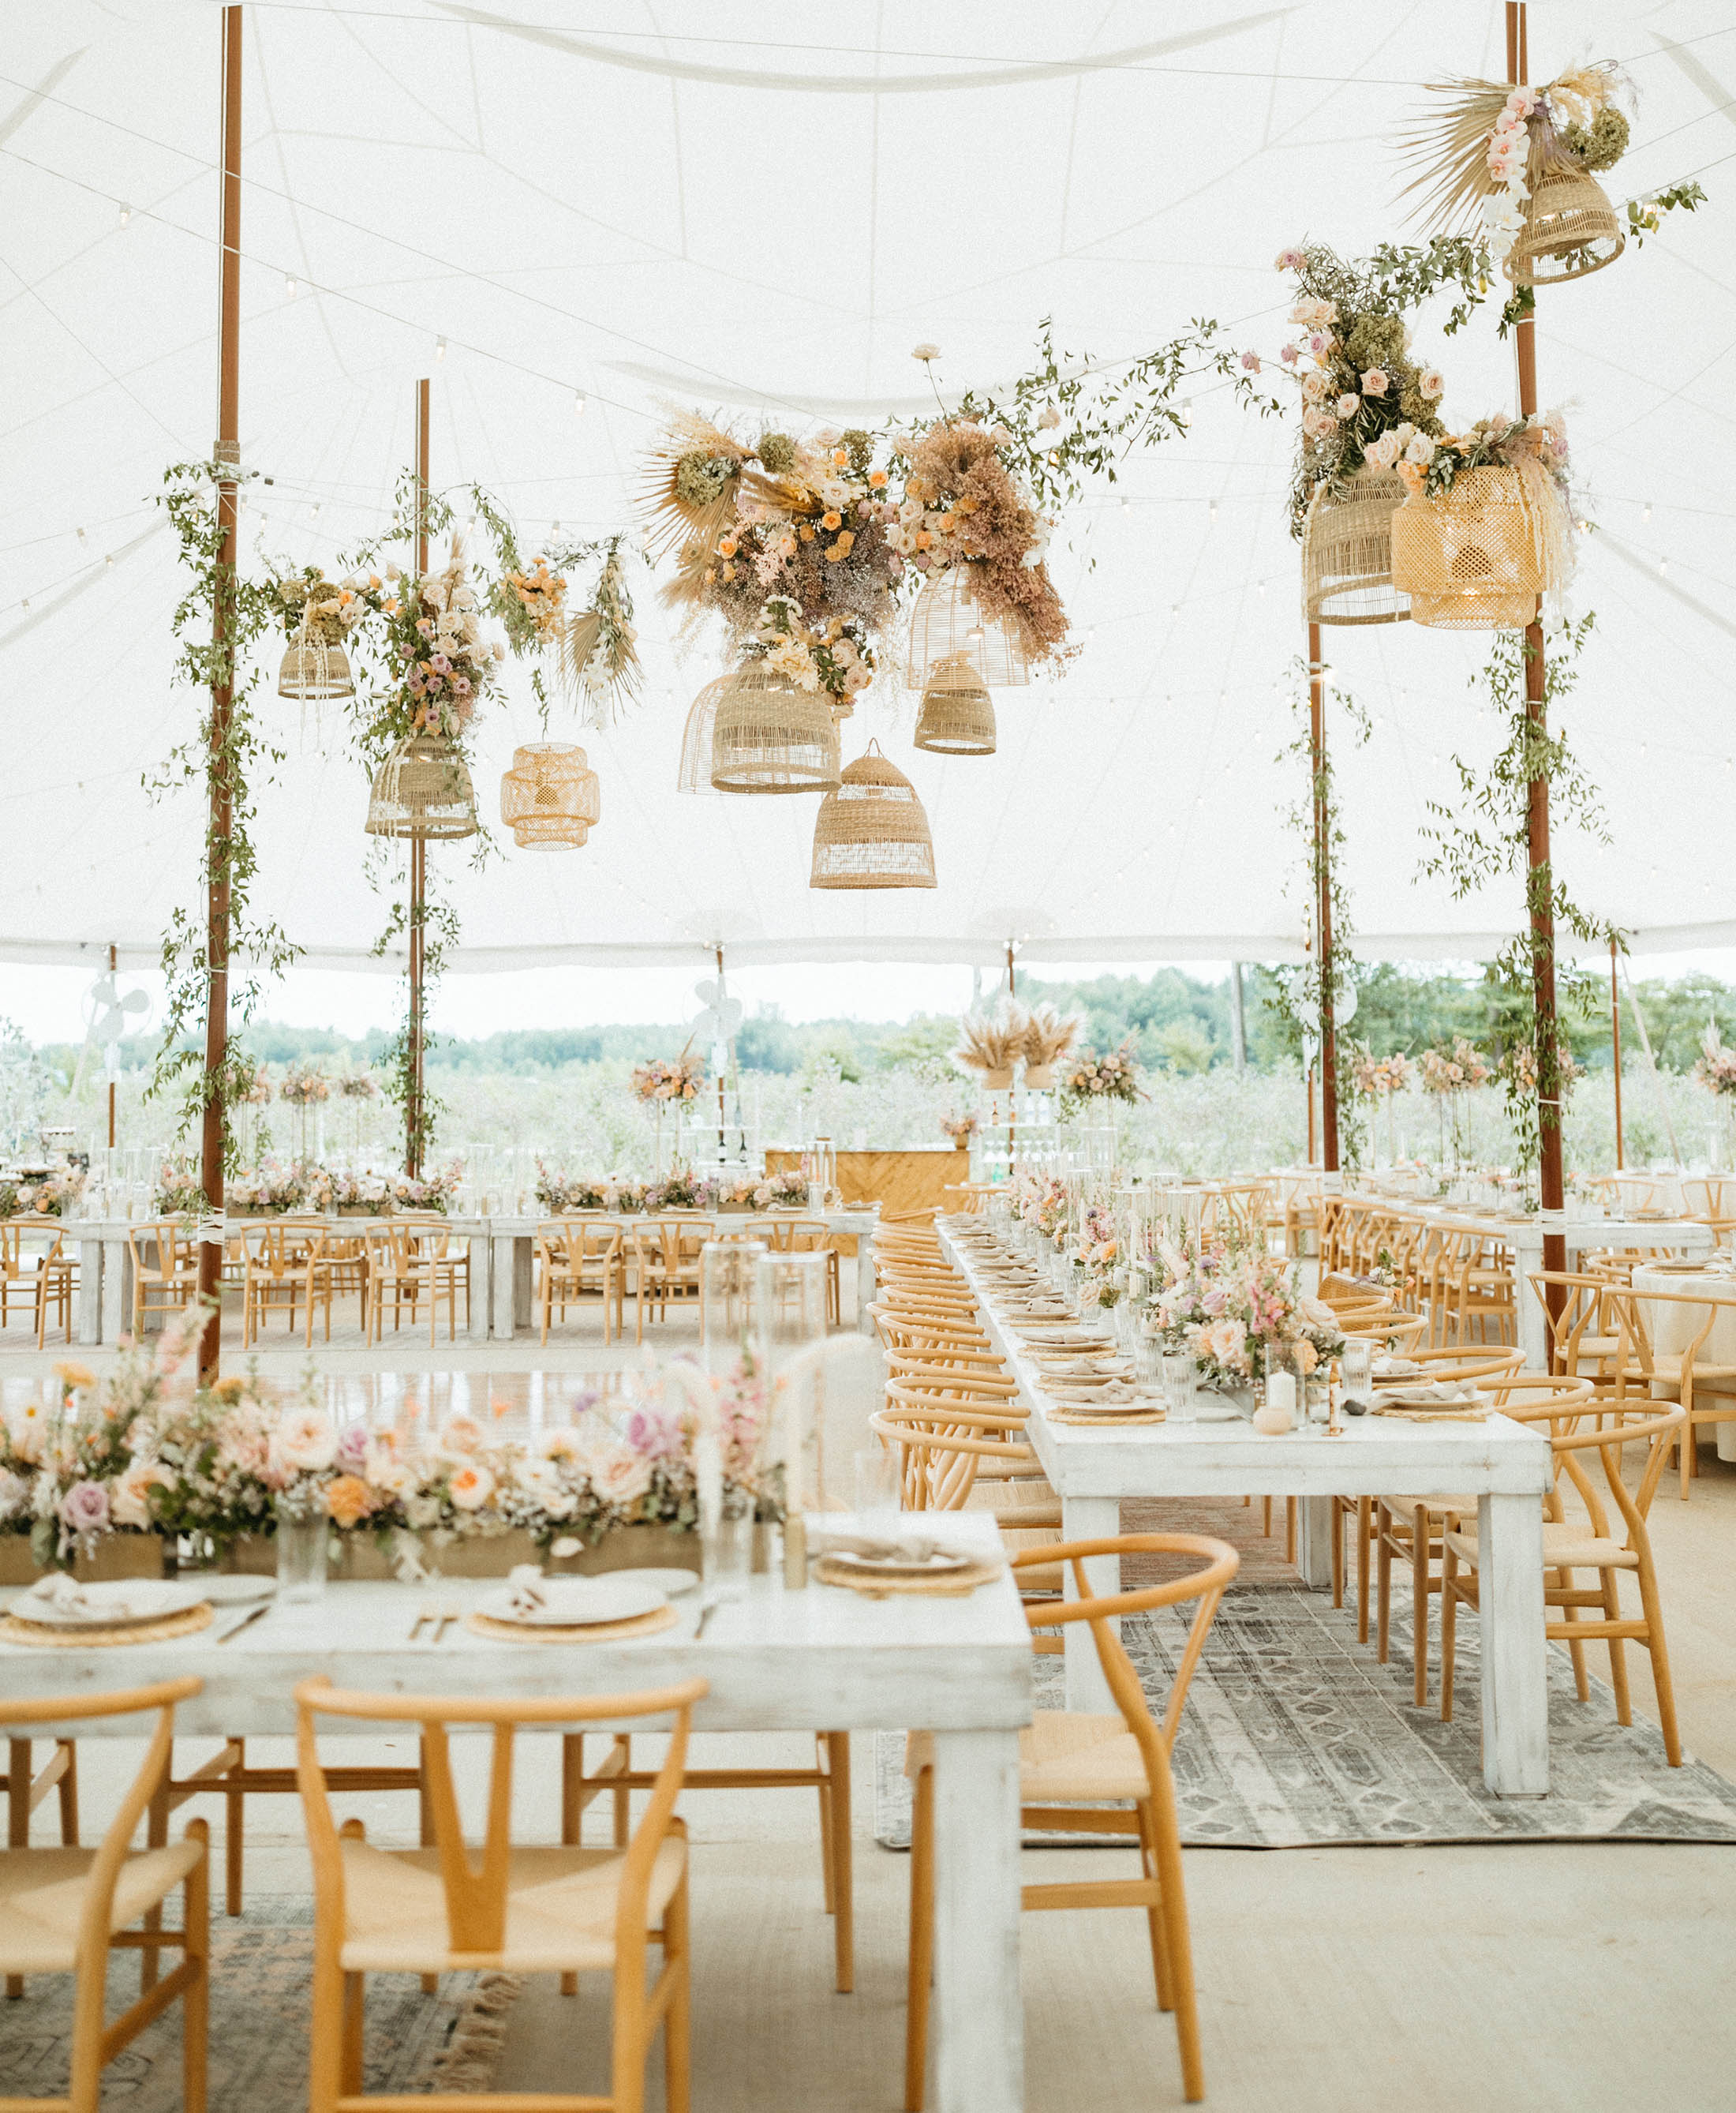 wedding tent with flowers and baskets hanging from the ceiling